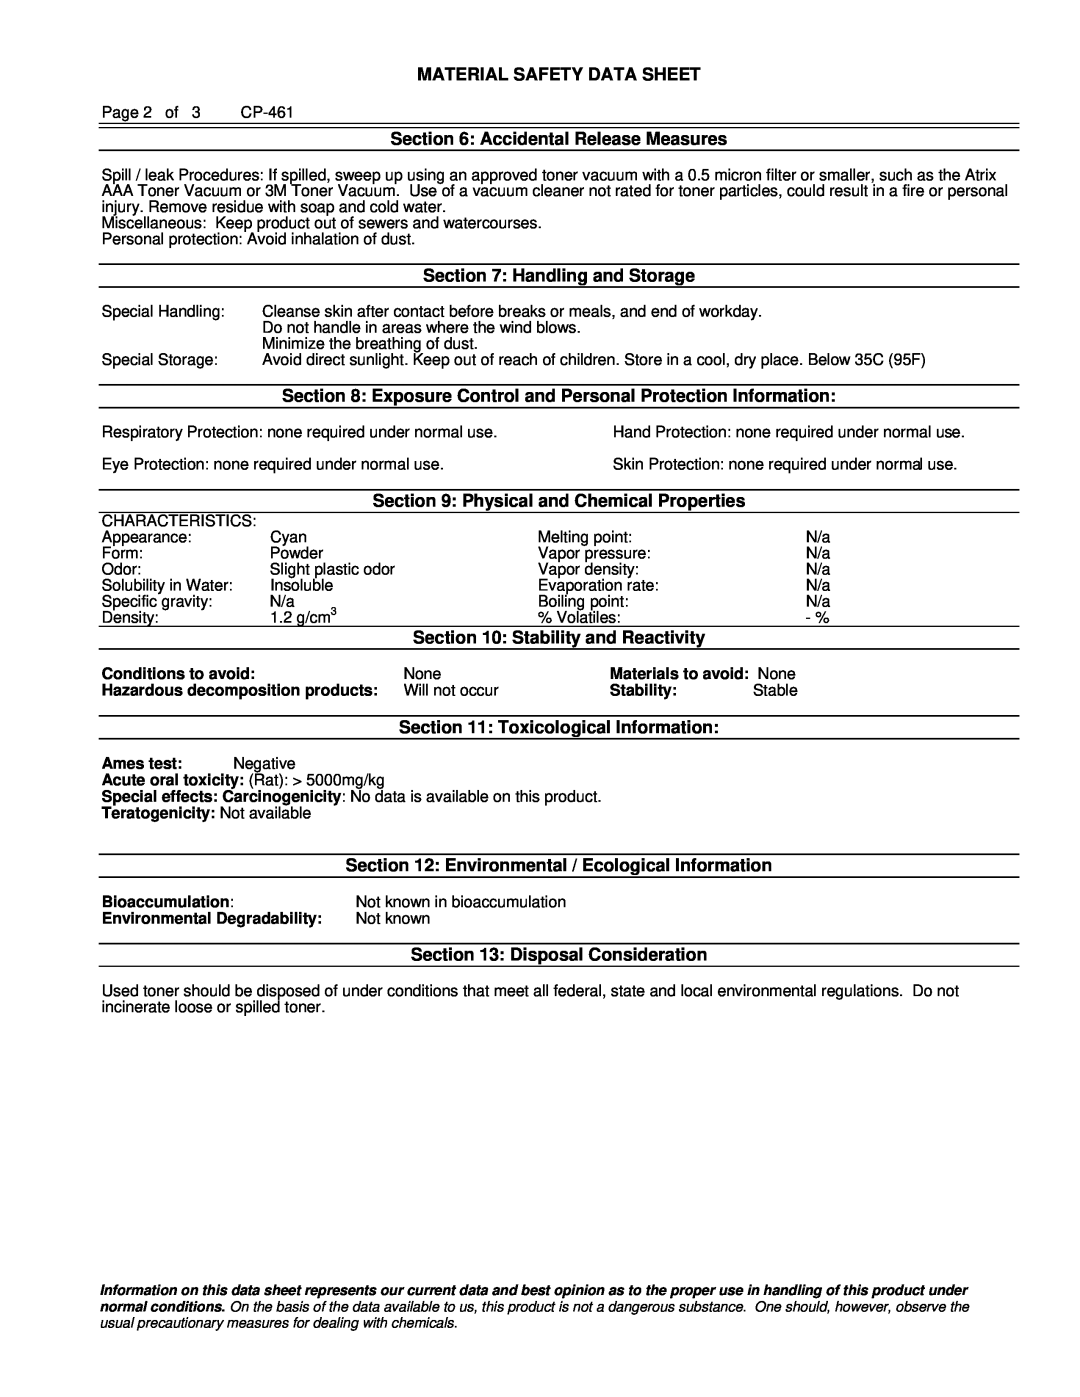 Lanier 480-0332 Material Safety Data Sheet, Accidental Release Measures, Handling and Storage, Stability and Reactivity 